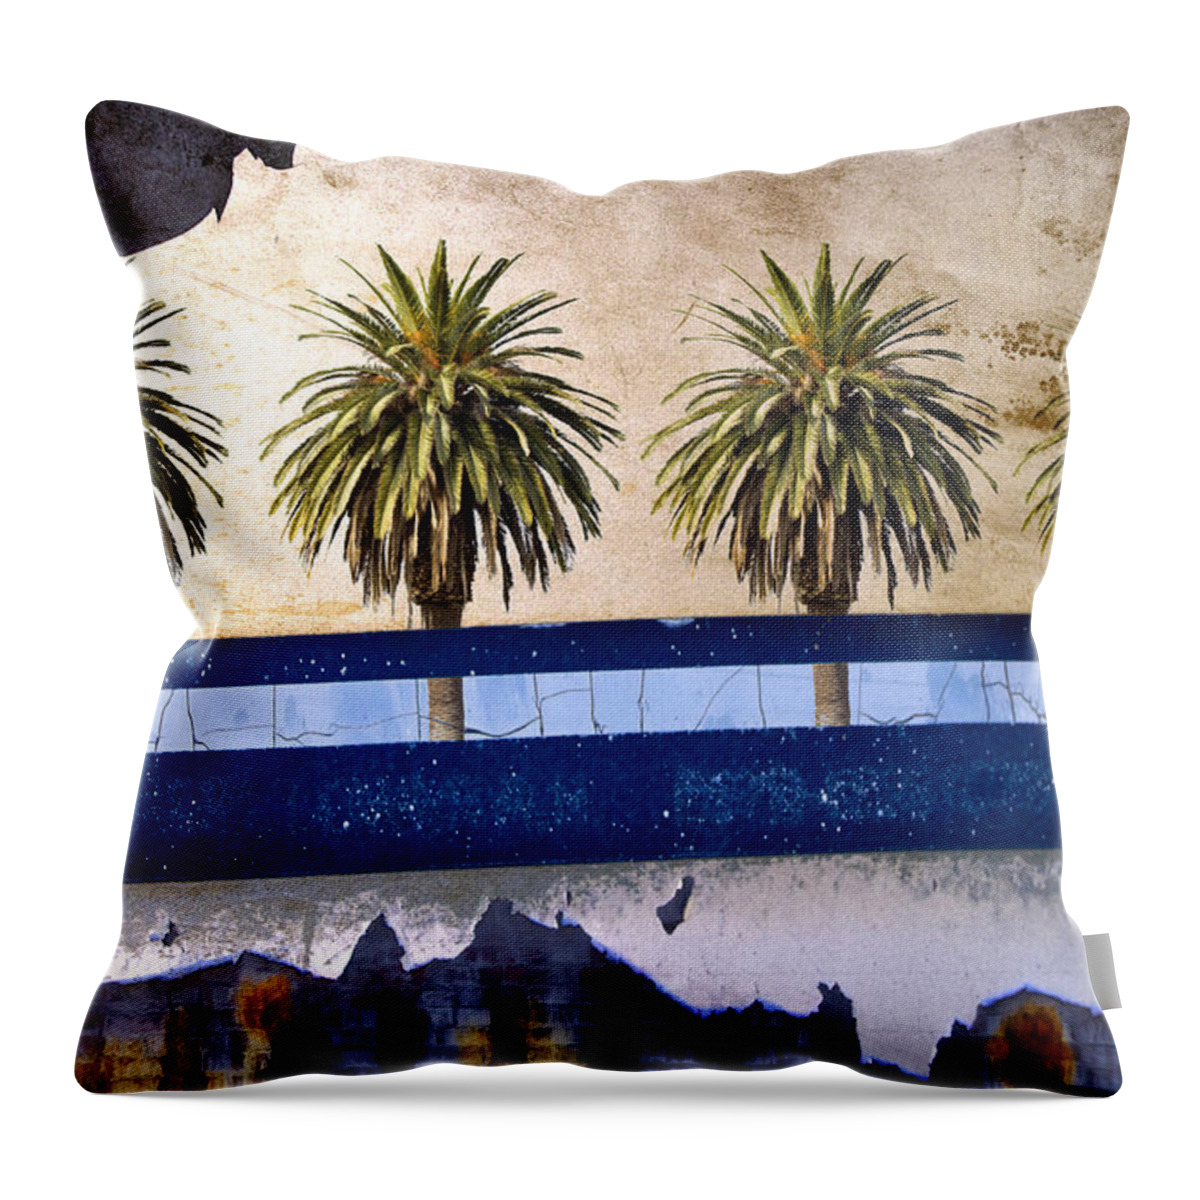 Indio Throw Pillow featuring the photograph Indio by Carol Leigh